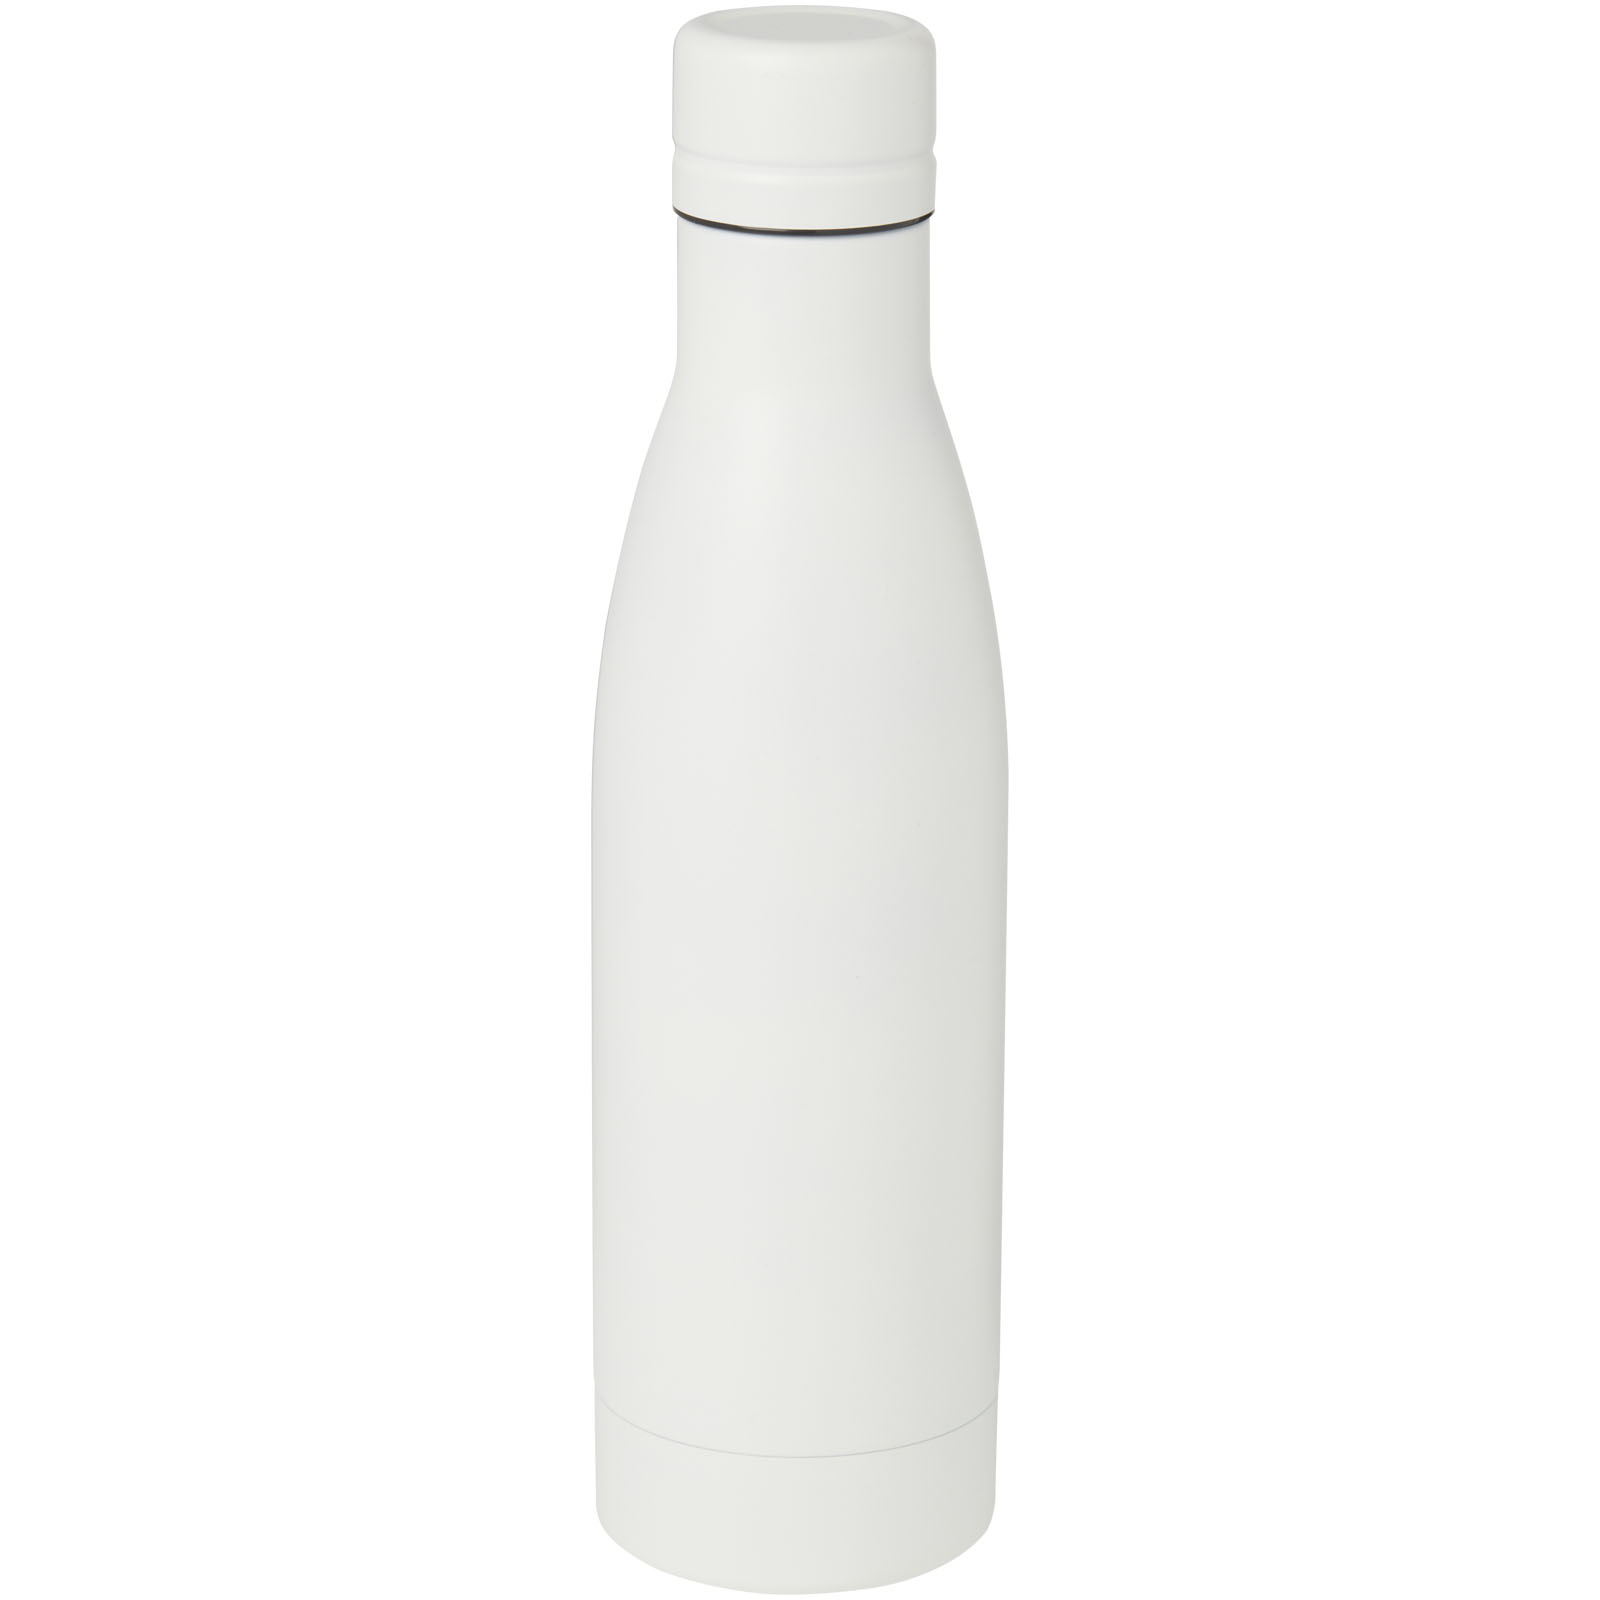 Advertising Insulated bottles - Vasa 500 ml RCS certified recycled stainless steel copper vacuum insulated bottle - 4